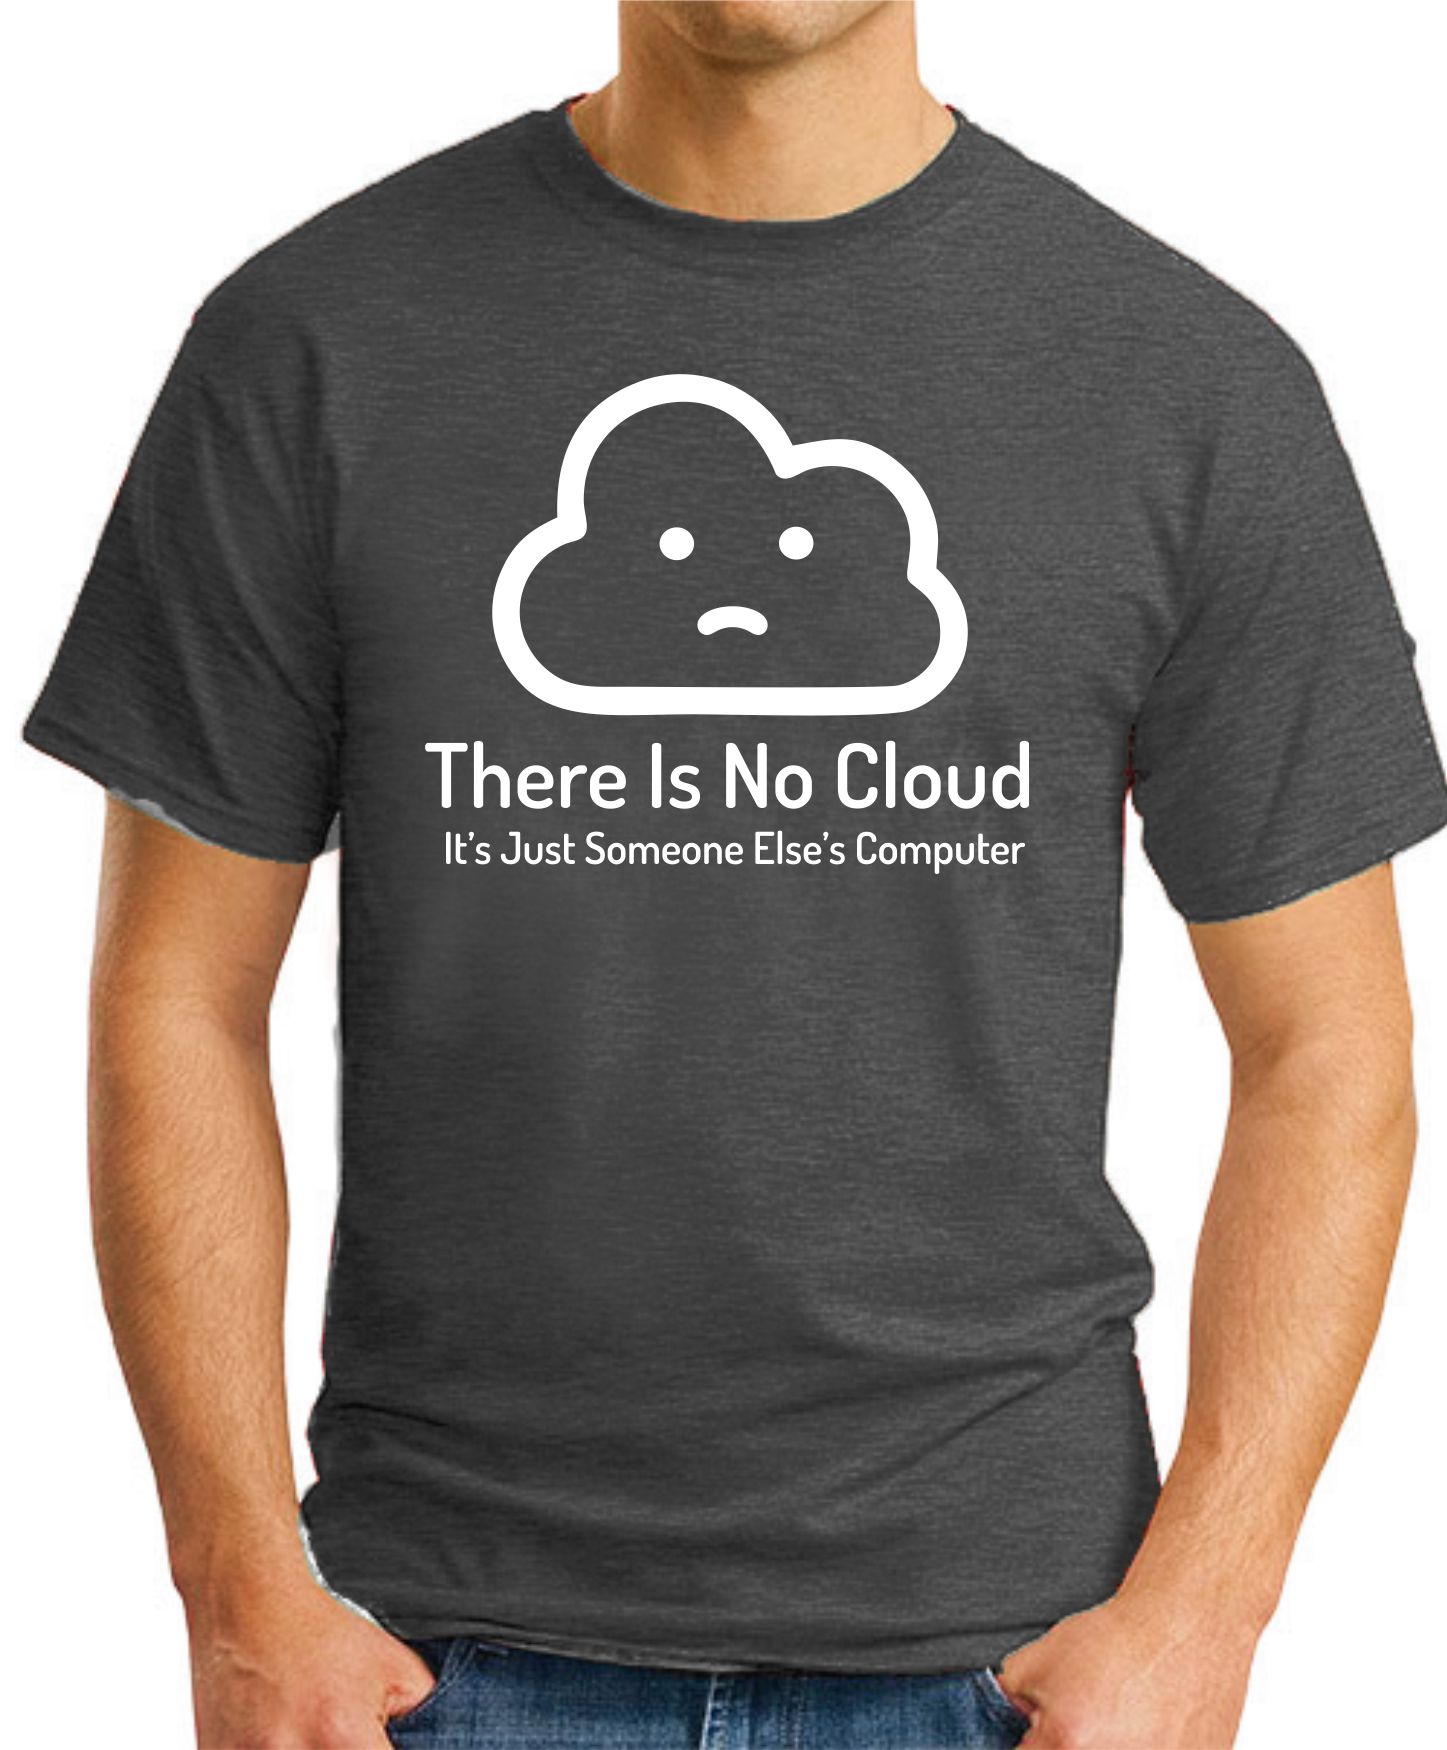 THERE IS NO CLOUD T-SHIRT - GeekyTees